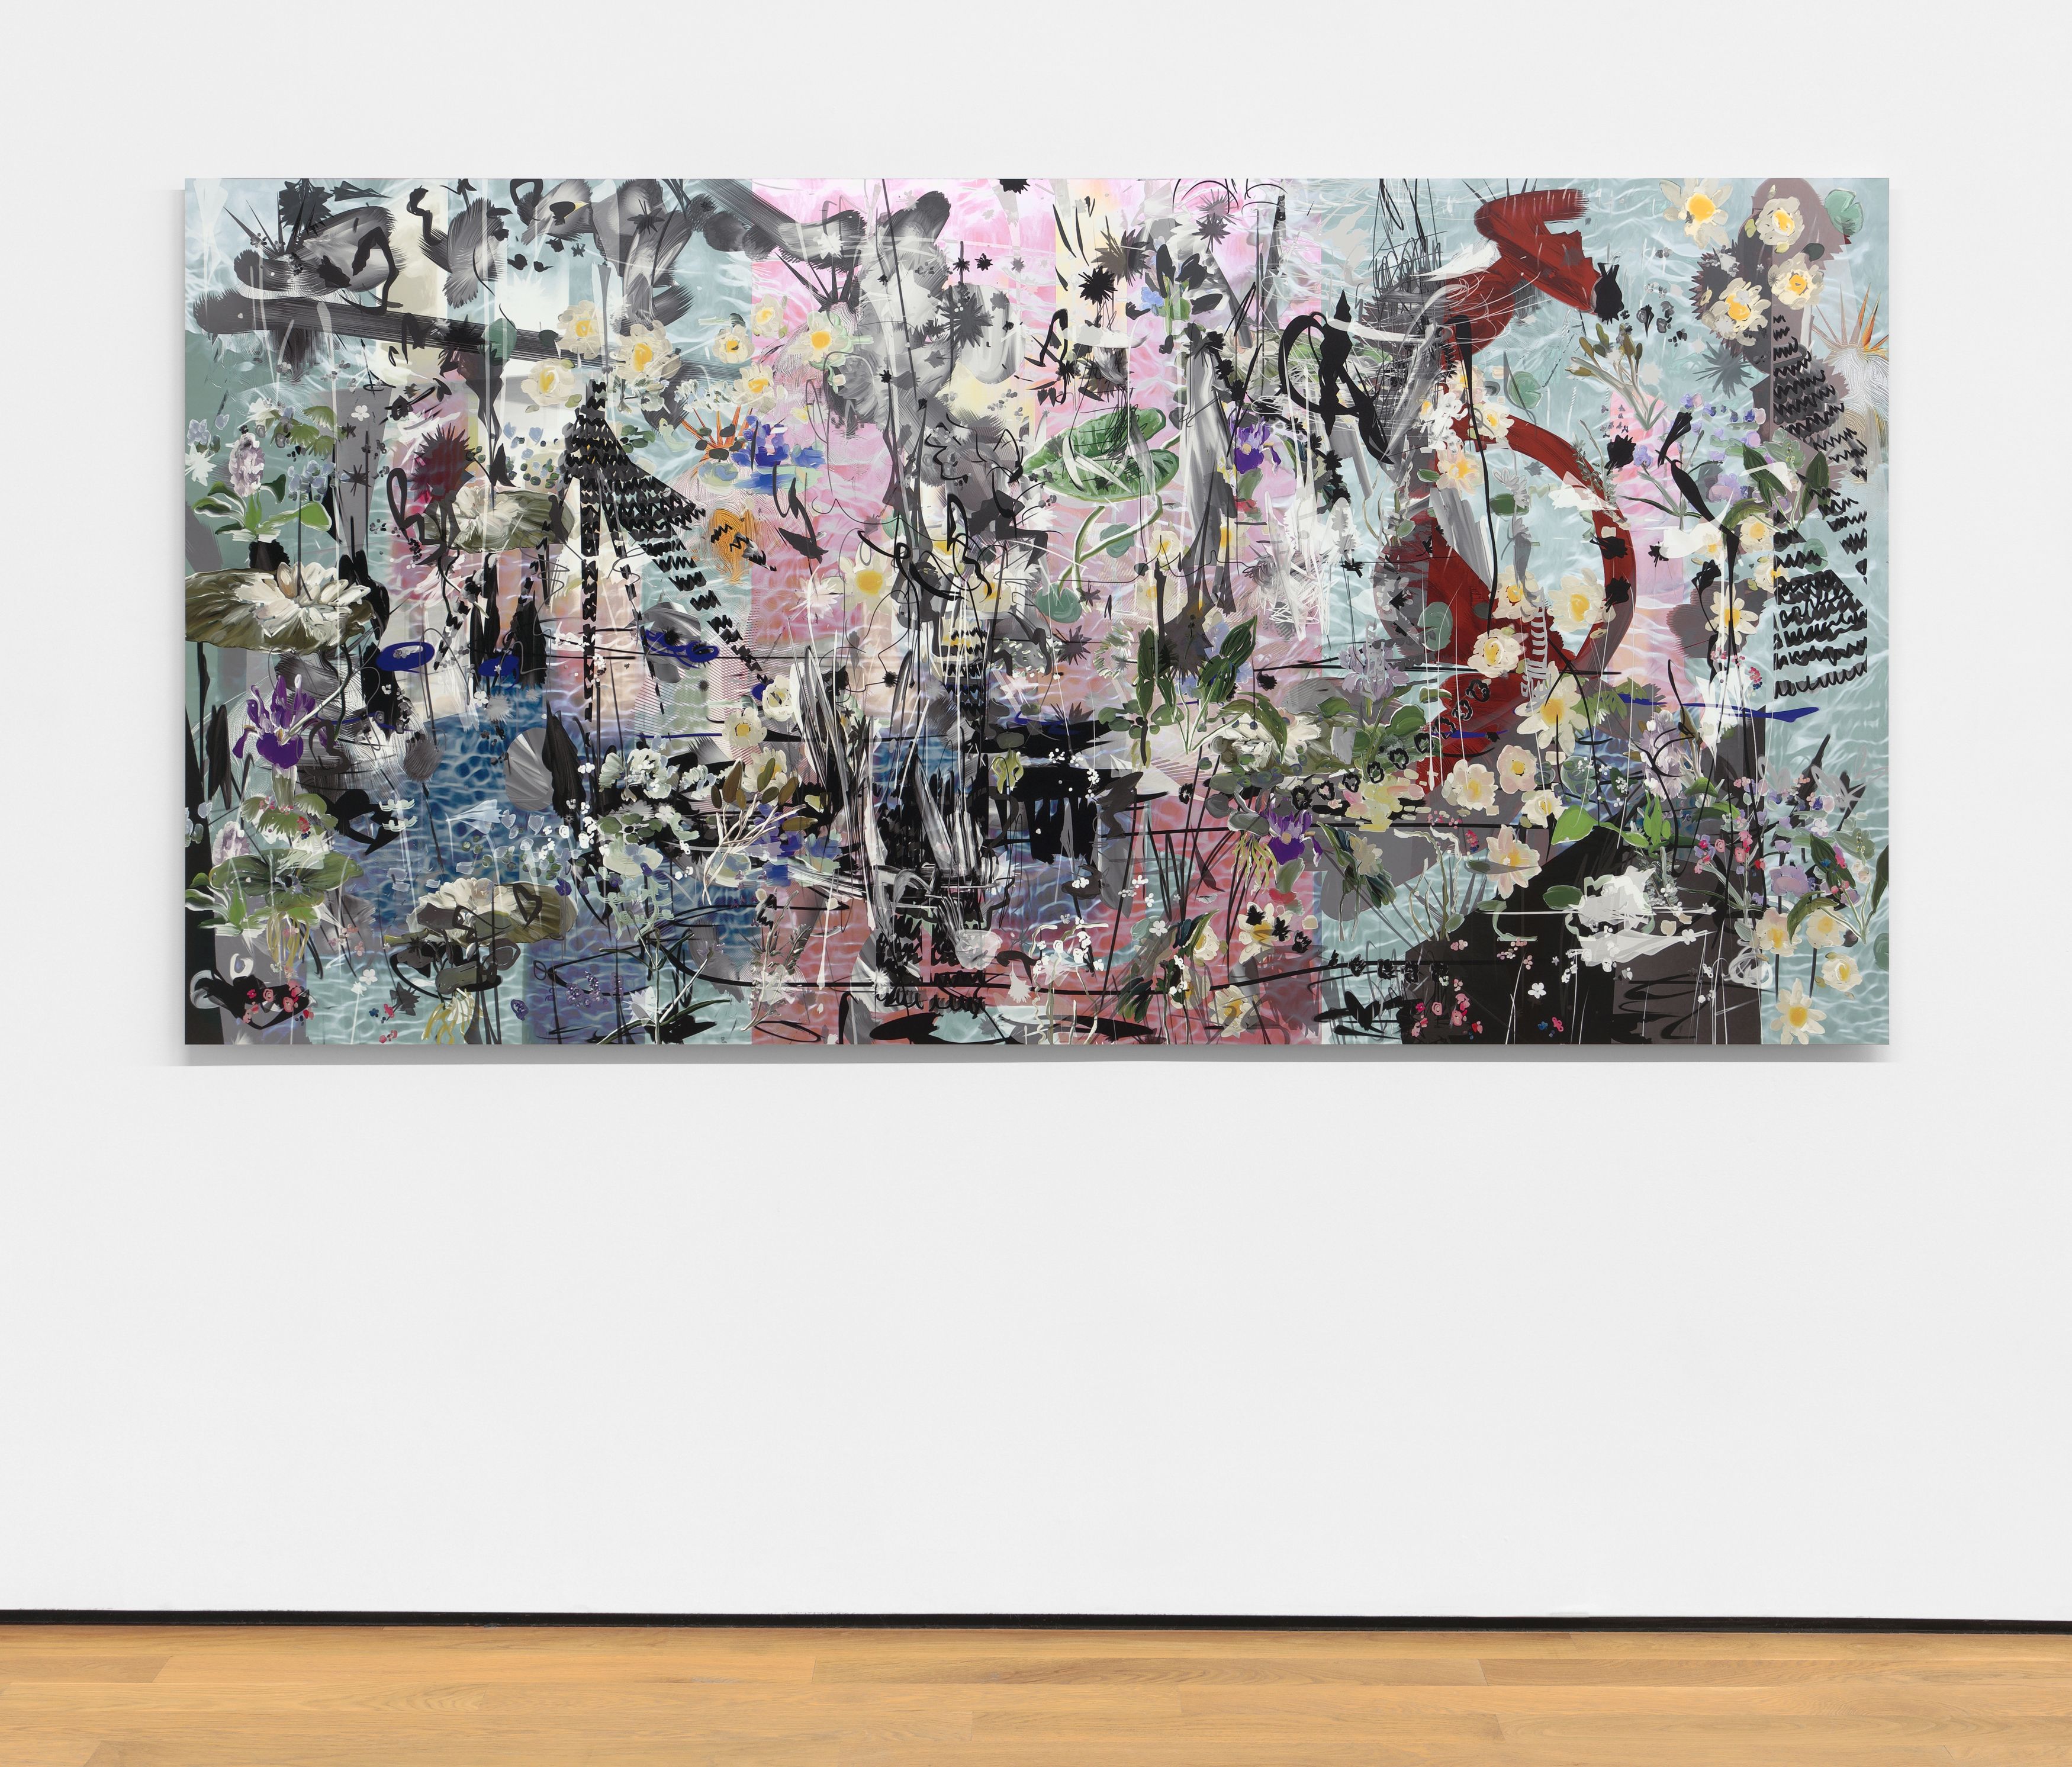 Petra Cortright, Institut->uncut peace since projects freshman, 2017, digital painting on anodized aluminum, 48 x 94 in. (121.92 x 238.76 cm.)